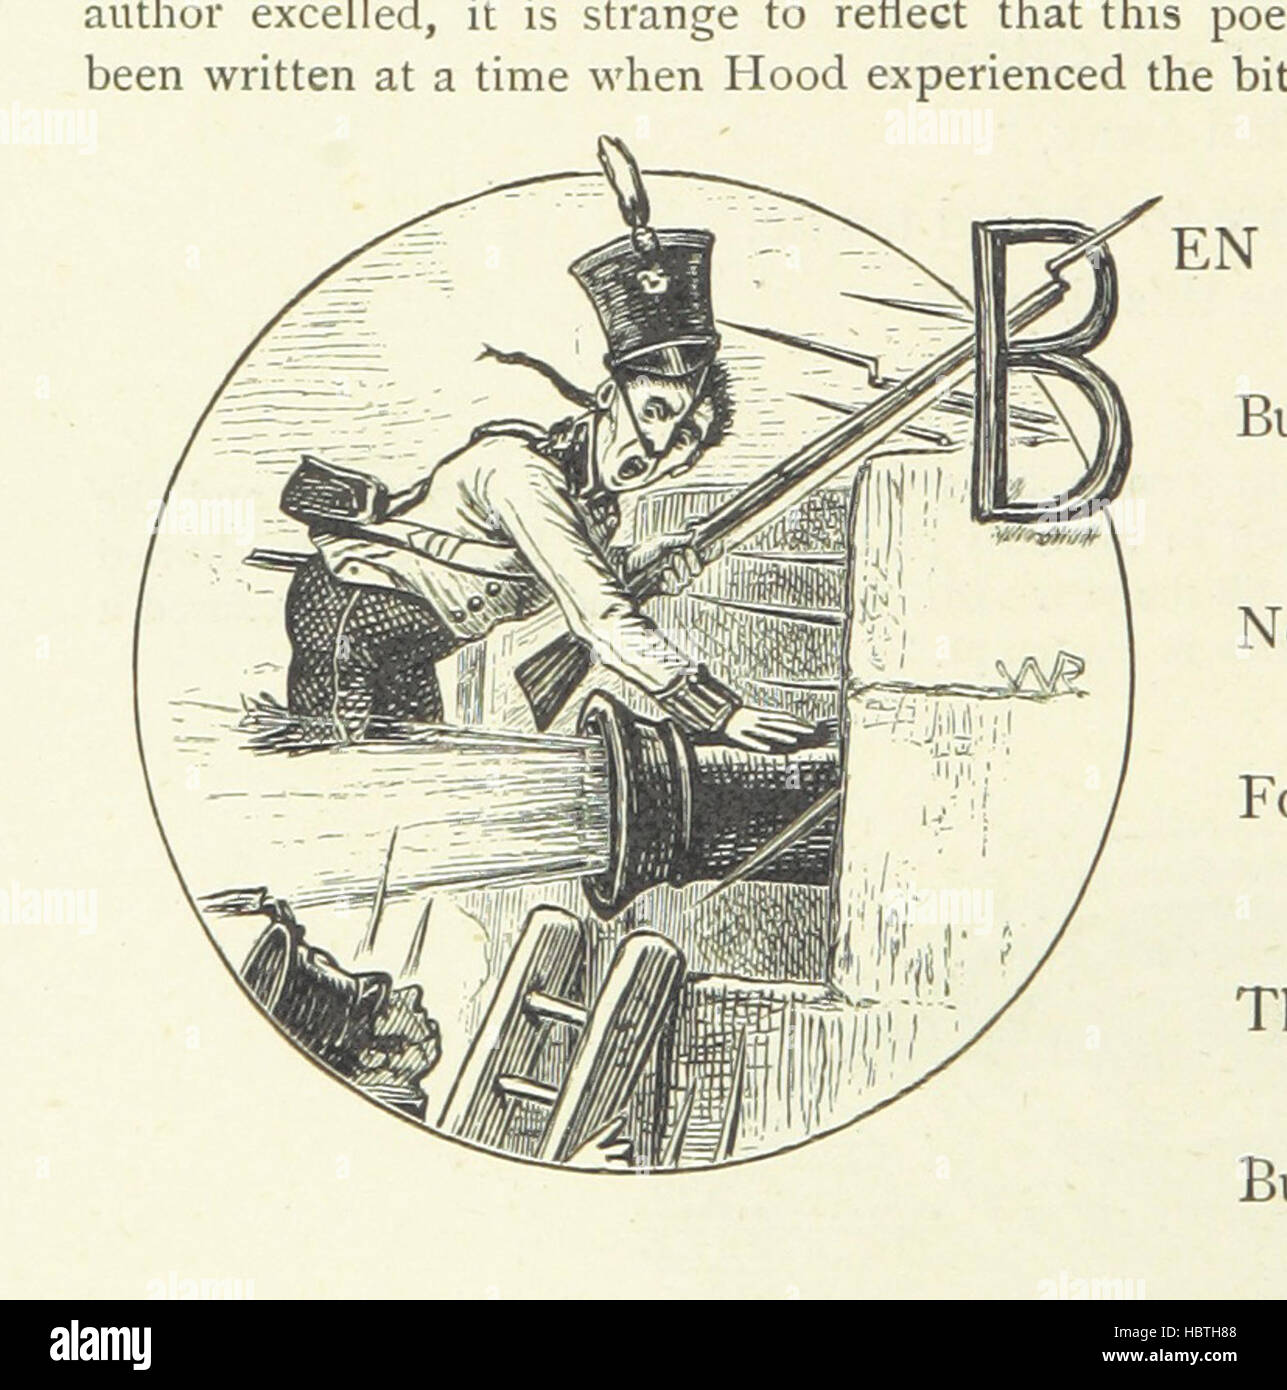 Image taken from page 242 of '[Illustrated British Ballads, old and new. Selected and edited by G. B. Smith.]' Image taken from page 242 of '[Illustrated British Ballads, old Stock Photo